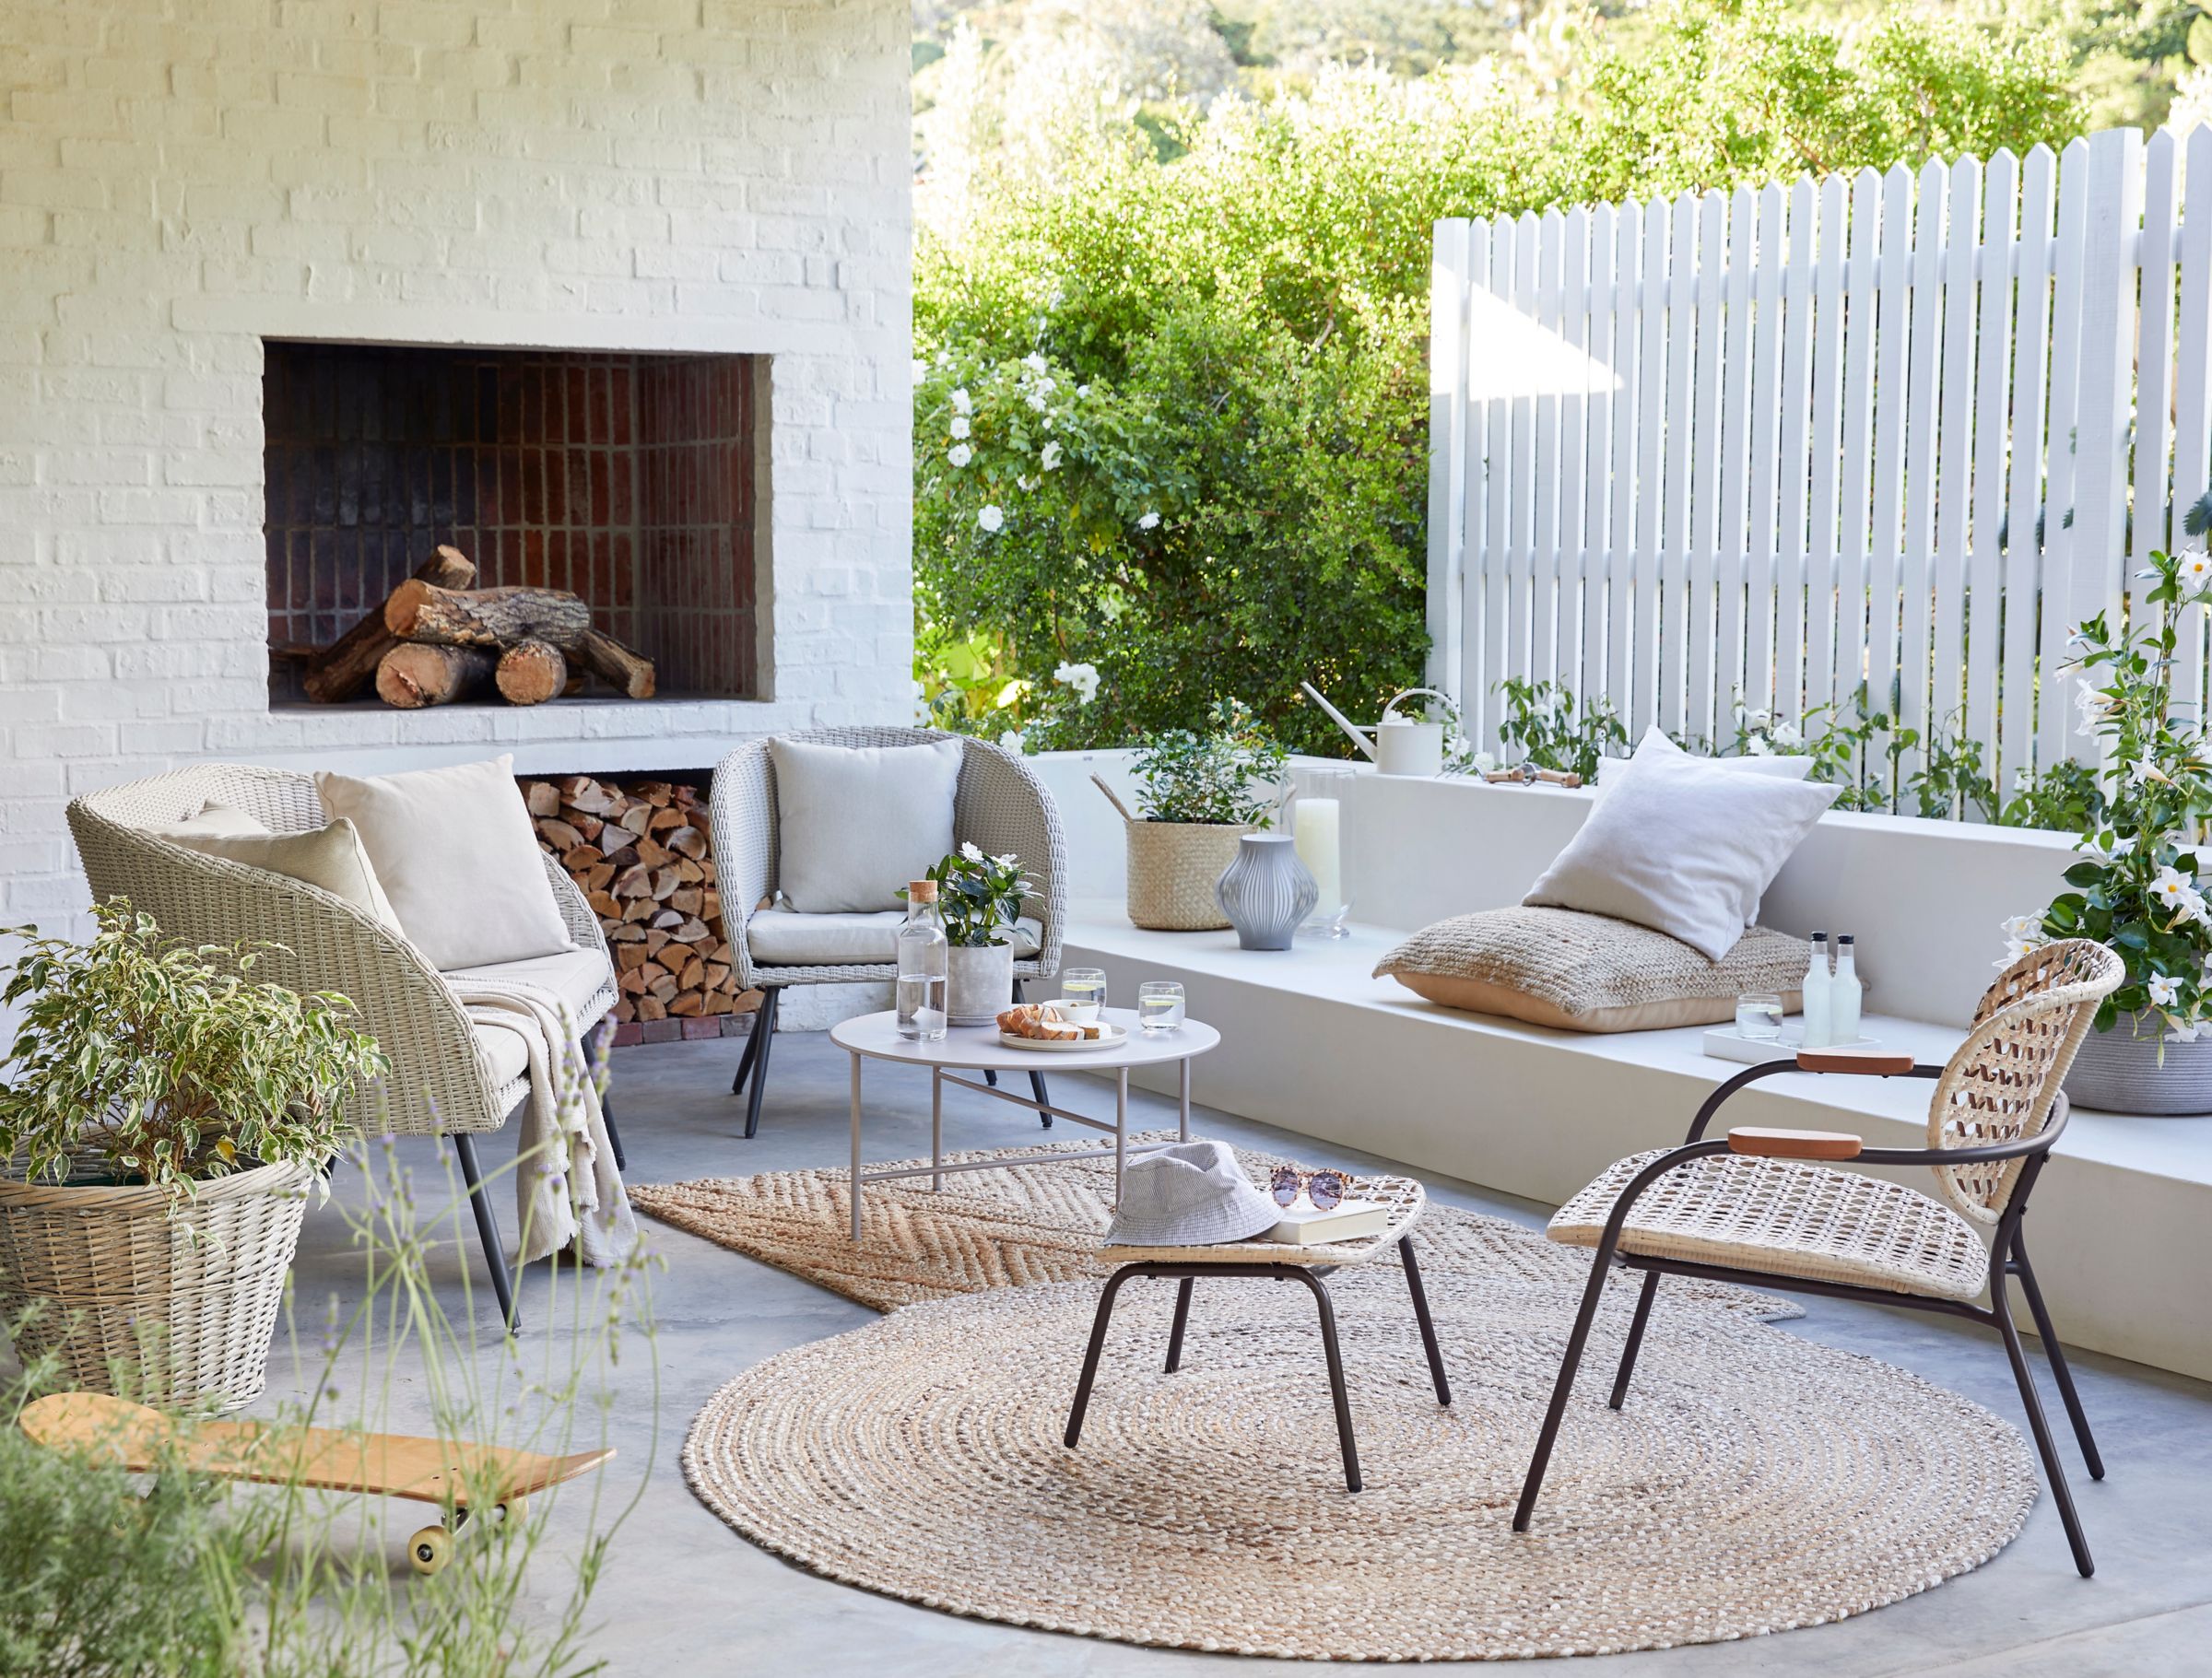 Make your garden your new living room this summer